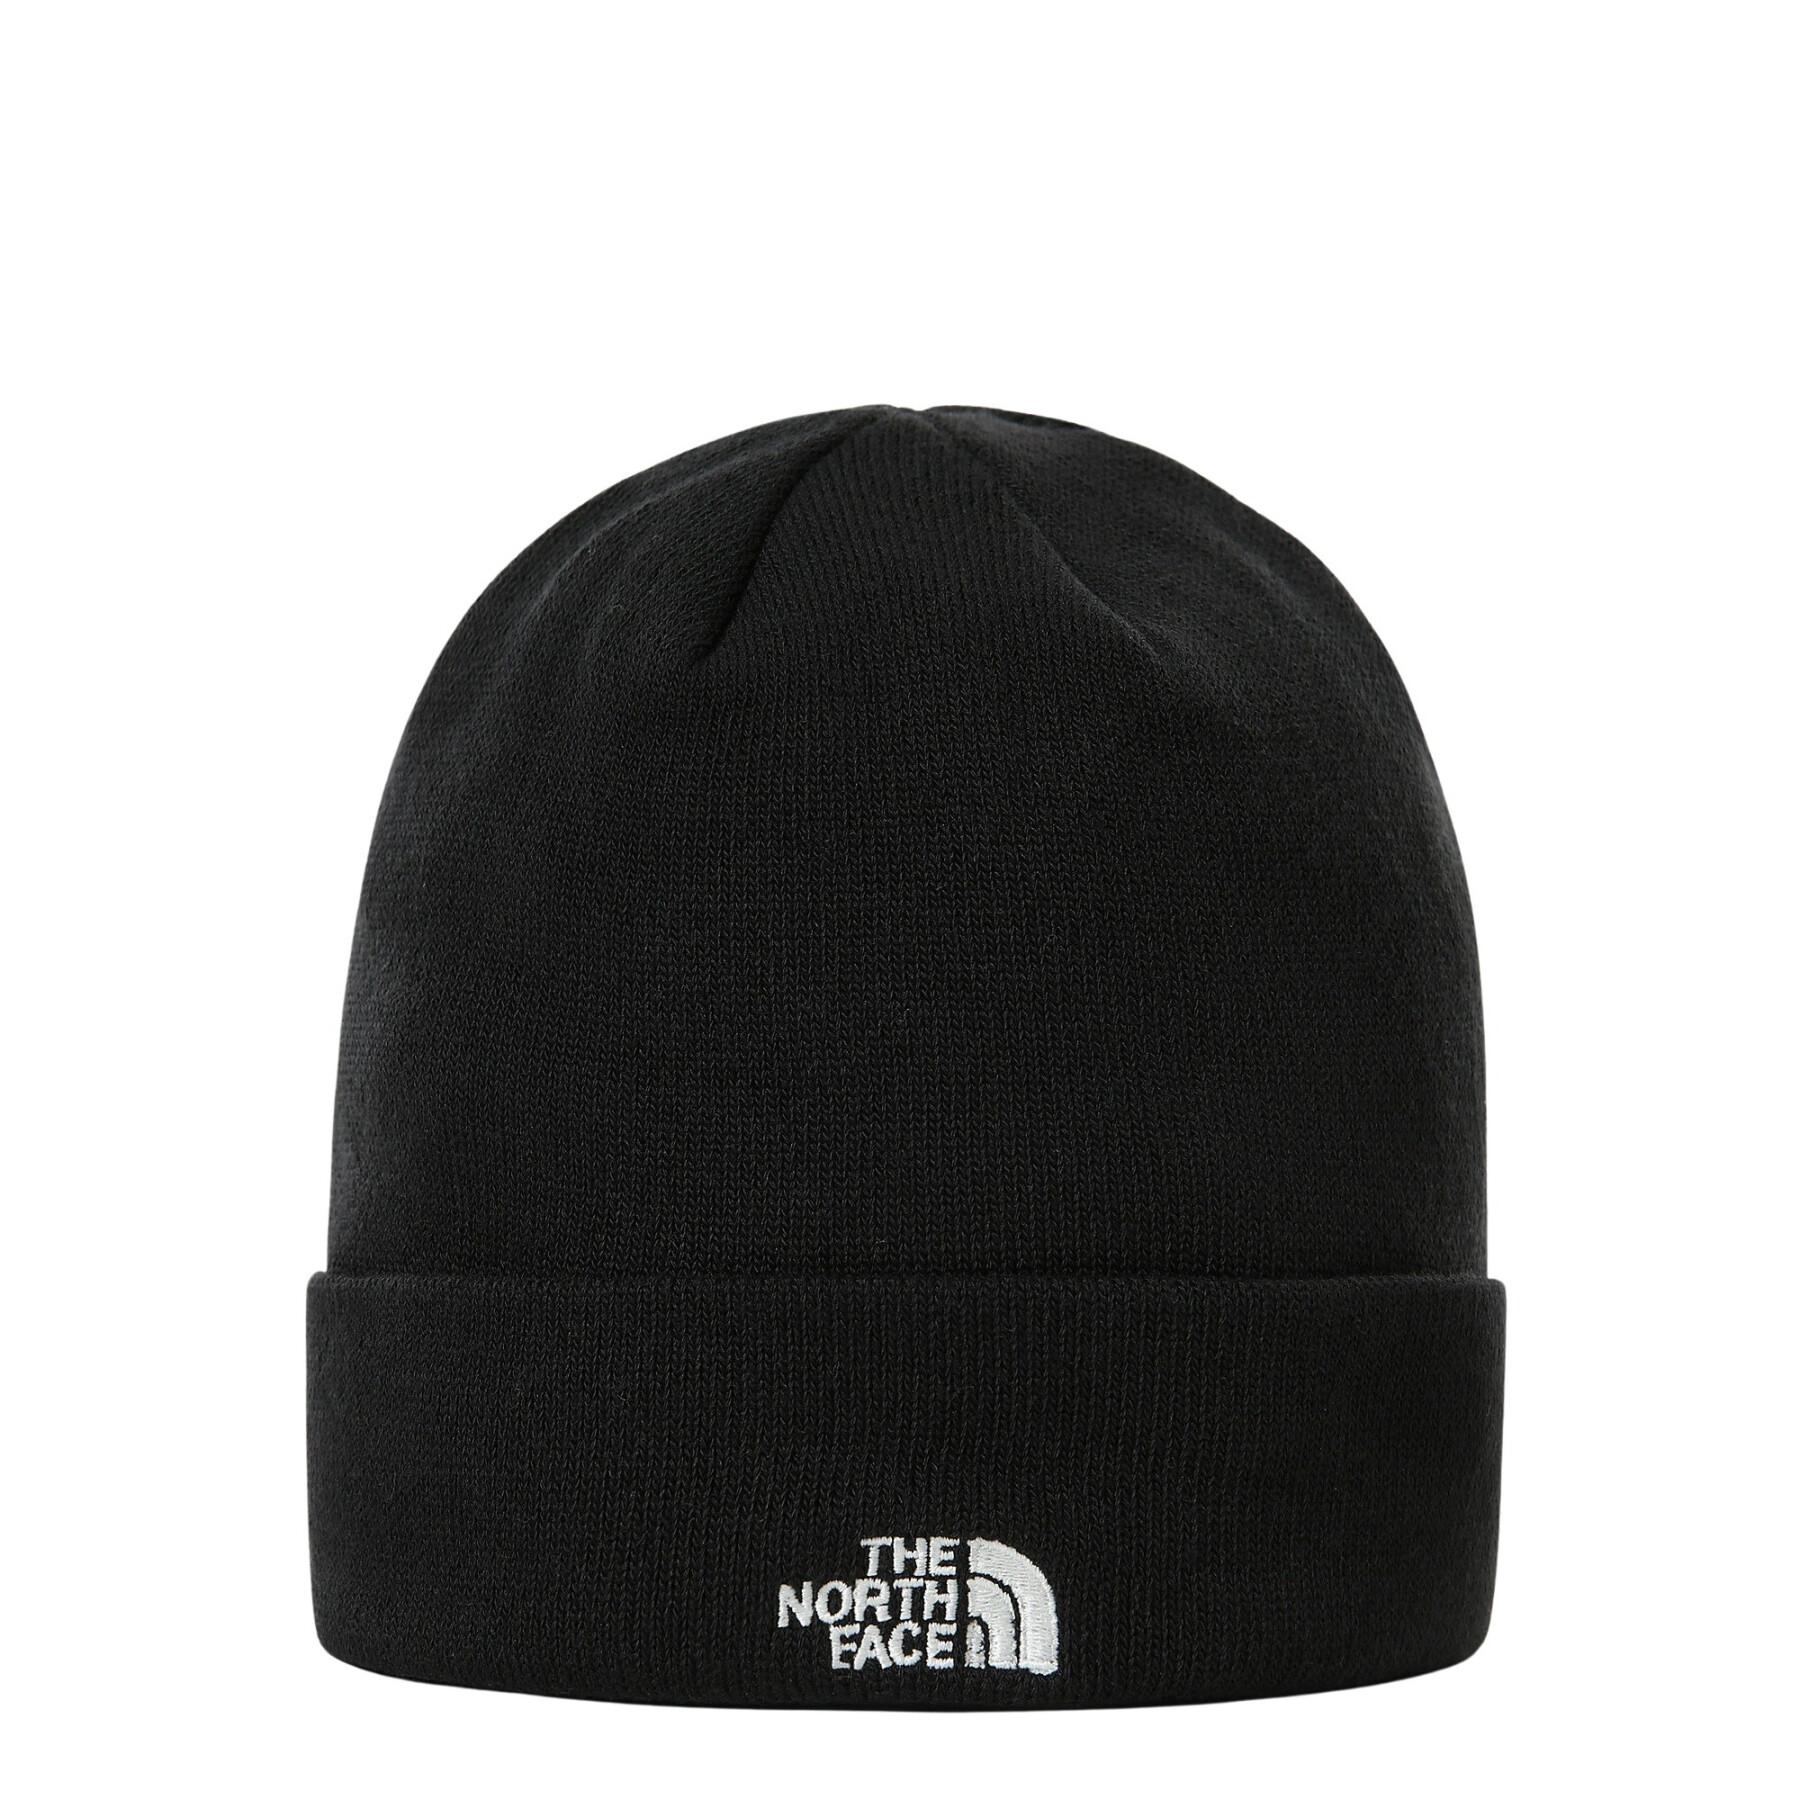 Motorhuv The North Face Norm Shallow